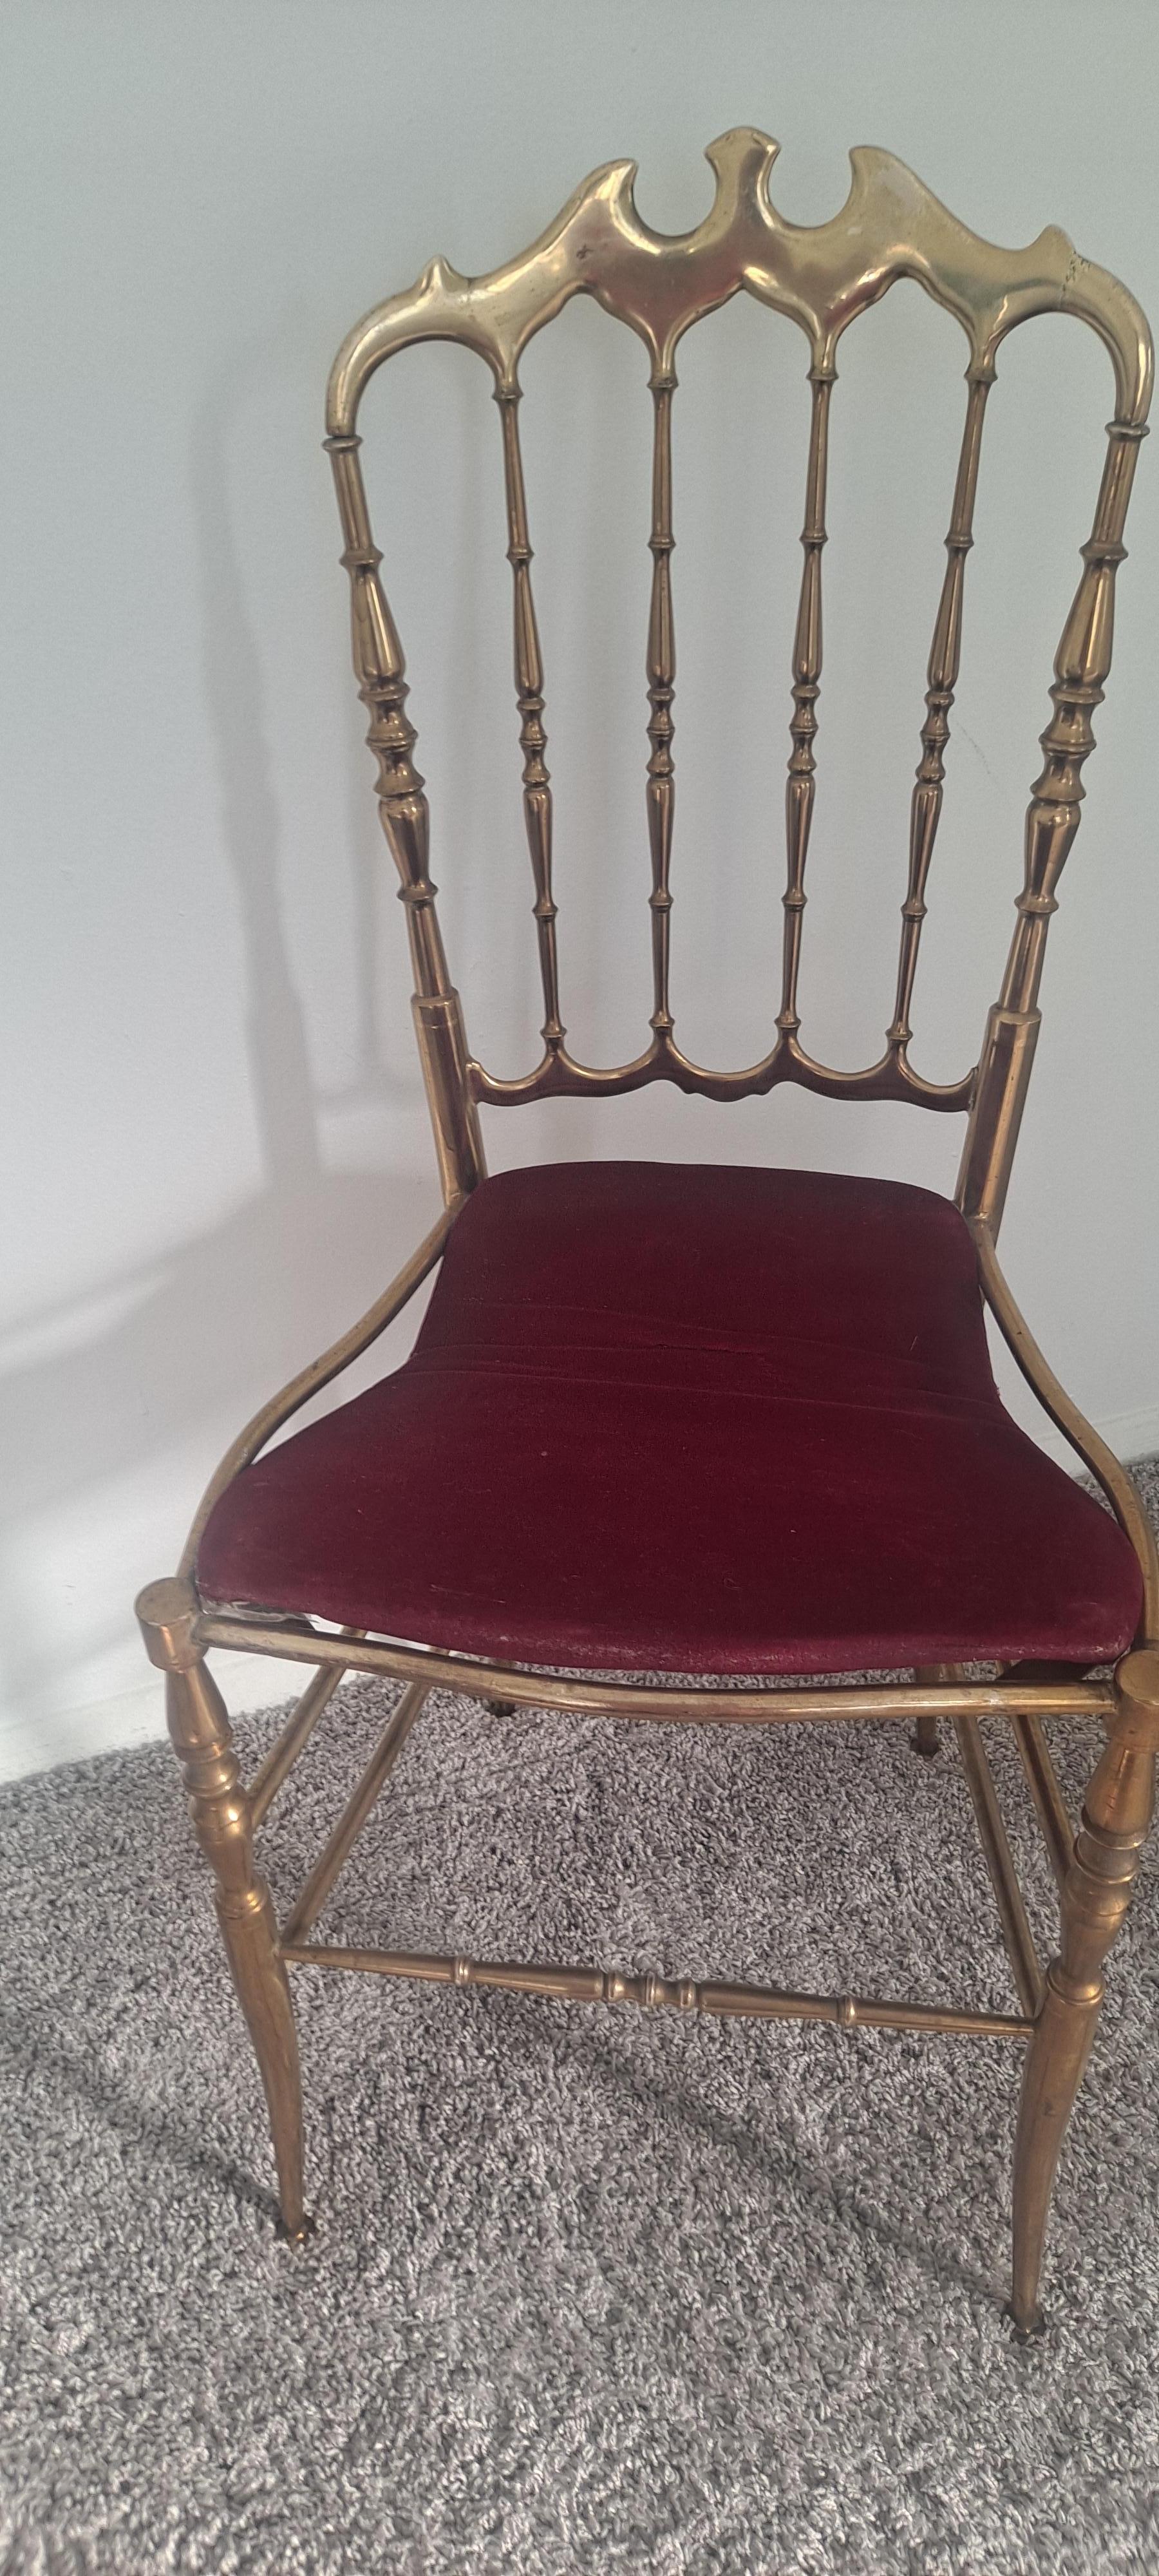 Neoclassical Solid Brass Italian Chiavari Chair In Good Condition For Sale In Los Angeles, CA